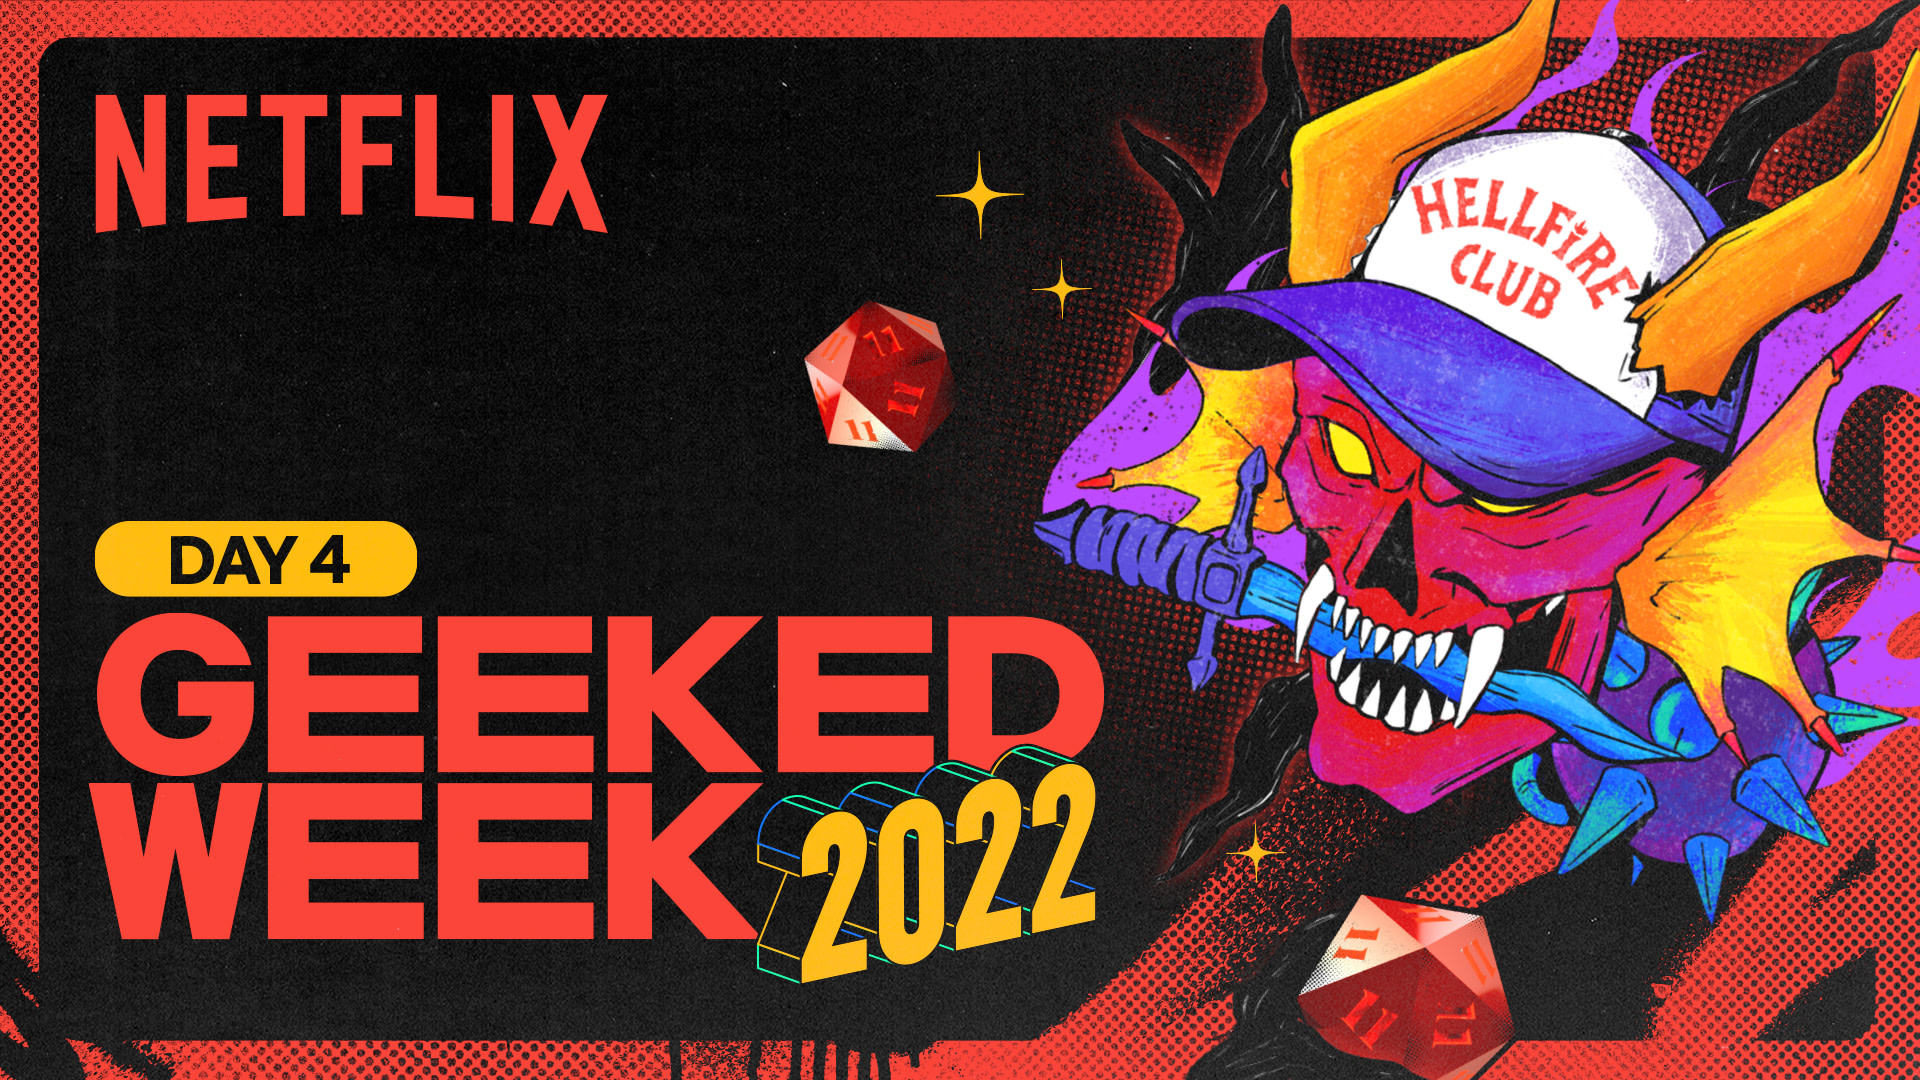 Geeked Week 2022 Recap: All the Behind-the-Scenes Scoop From ‘Stranger Things’ Day